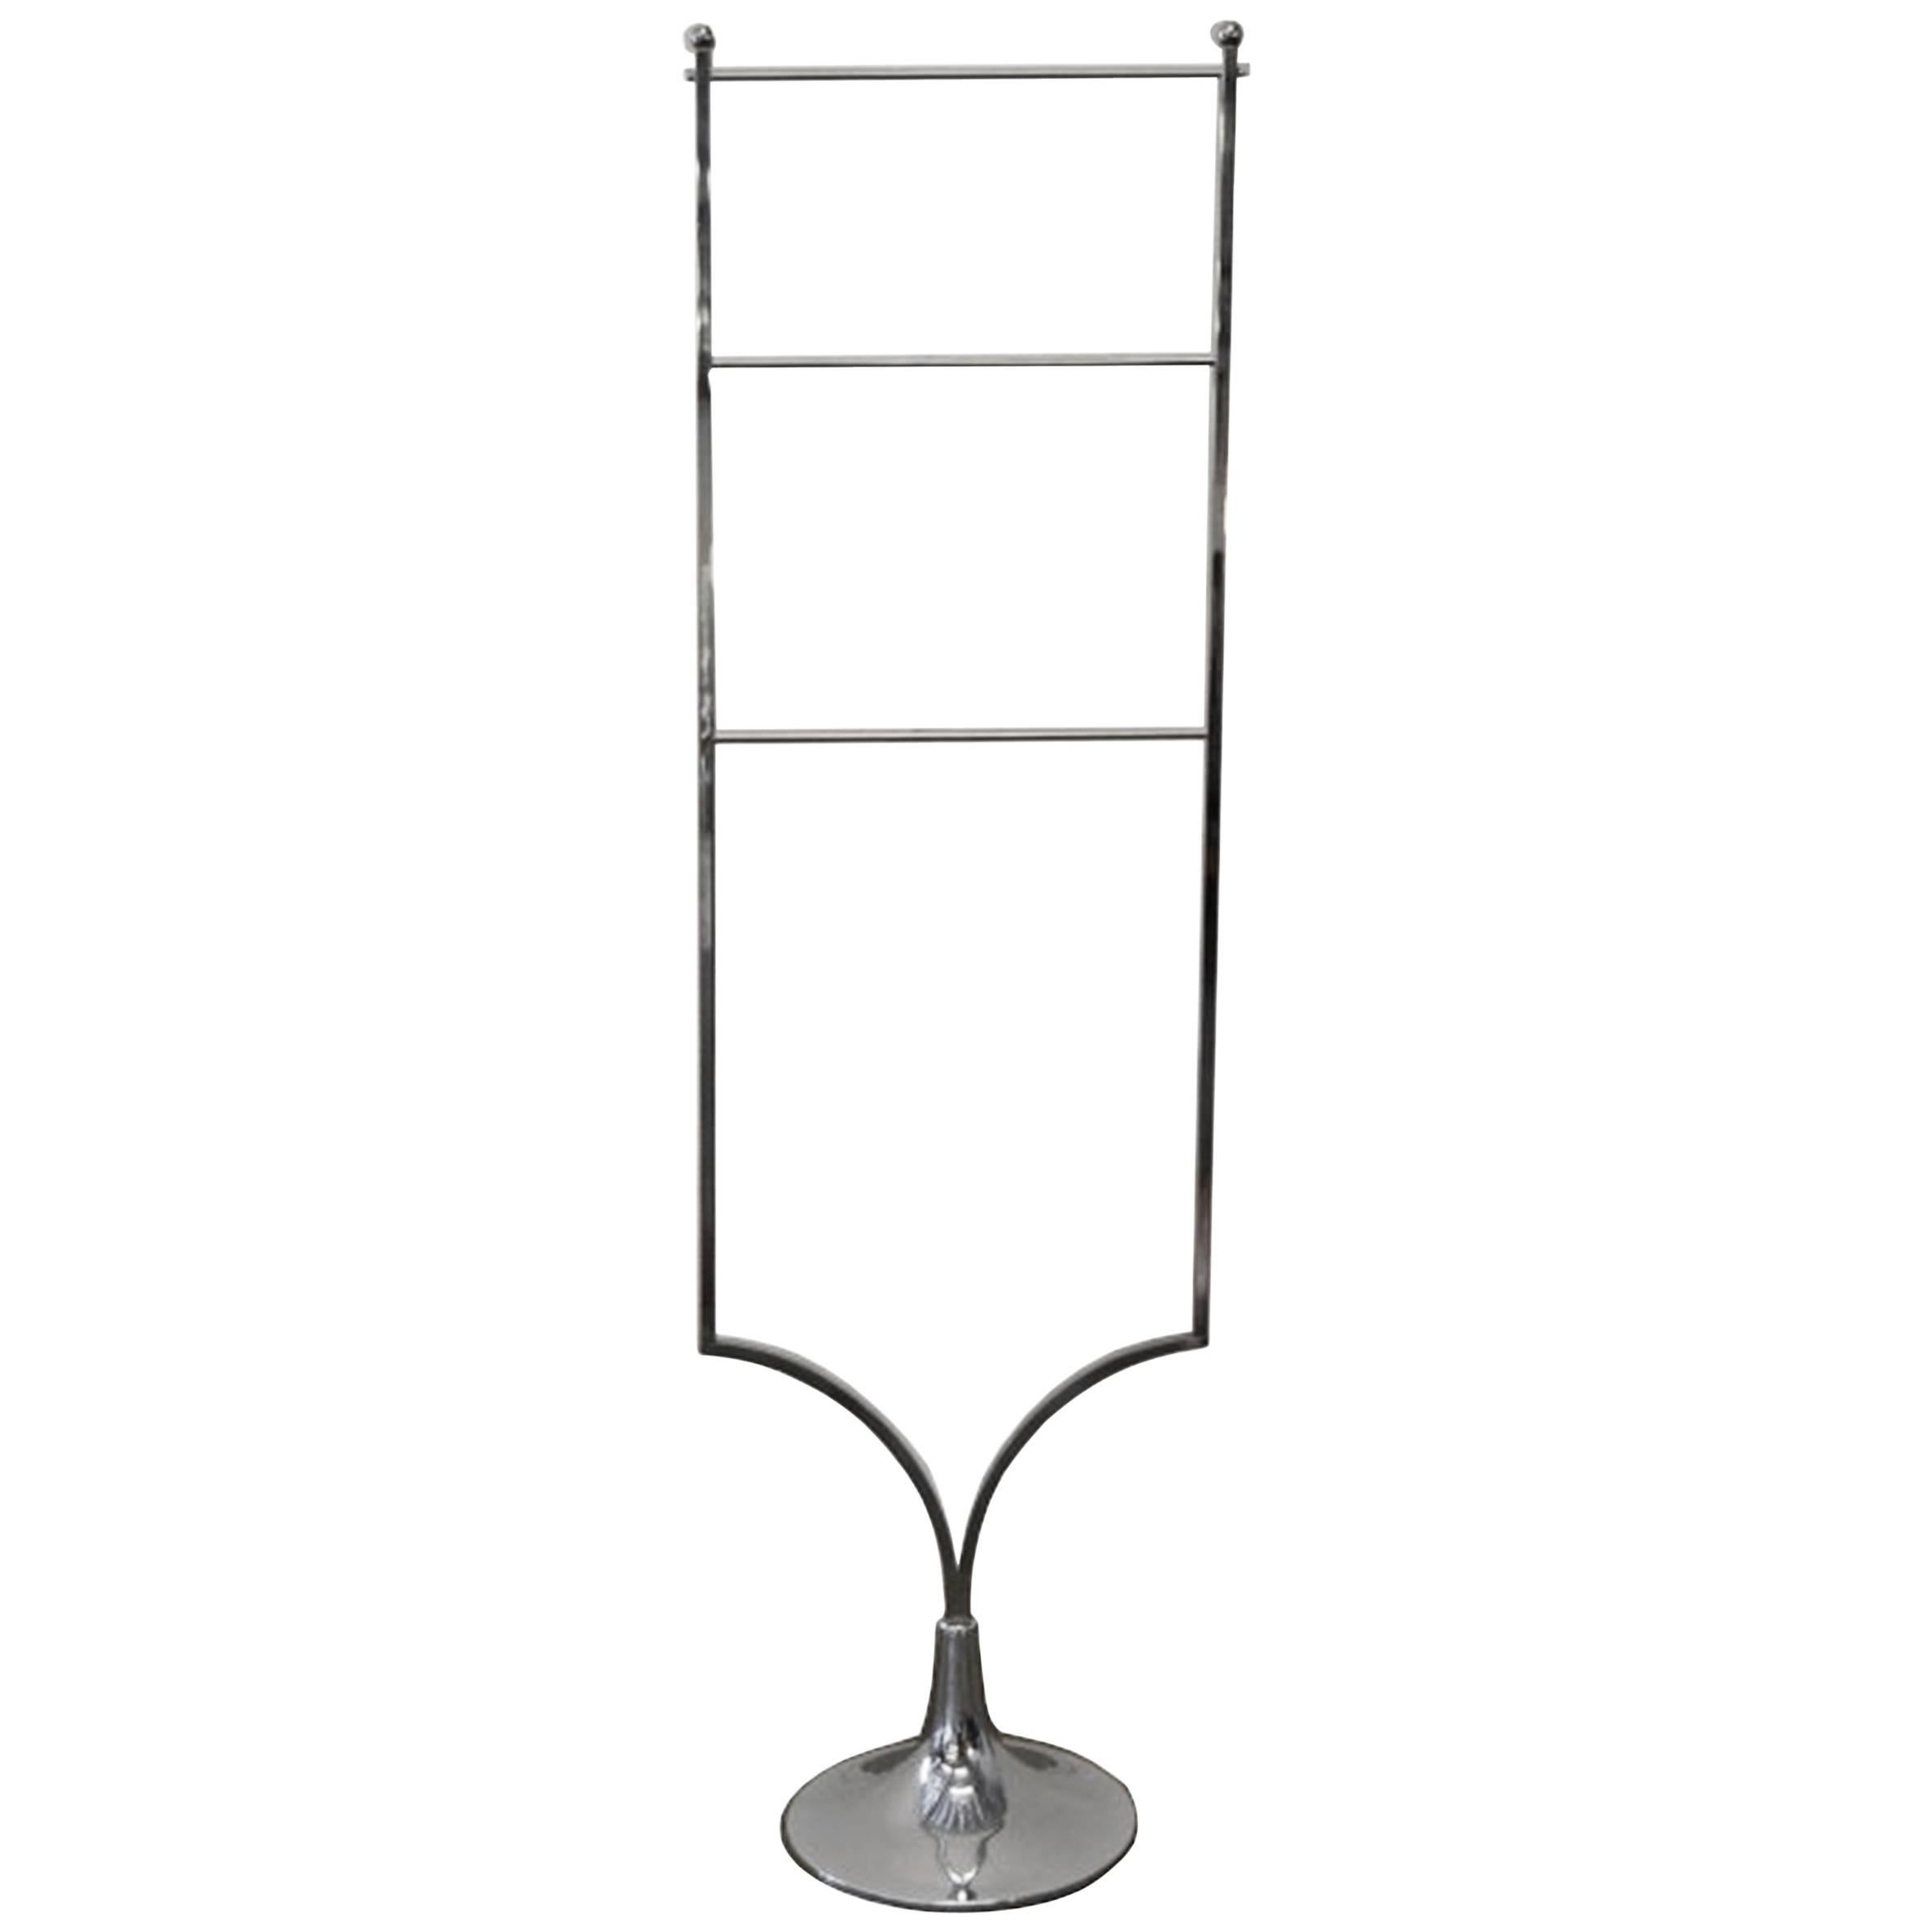 Lader Back Towel Rack in Nickel by Charles Hollis Jones for Lucille Ball